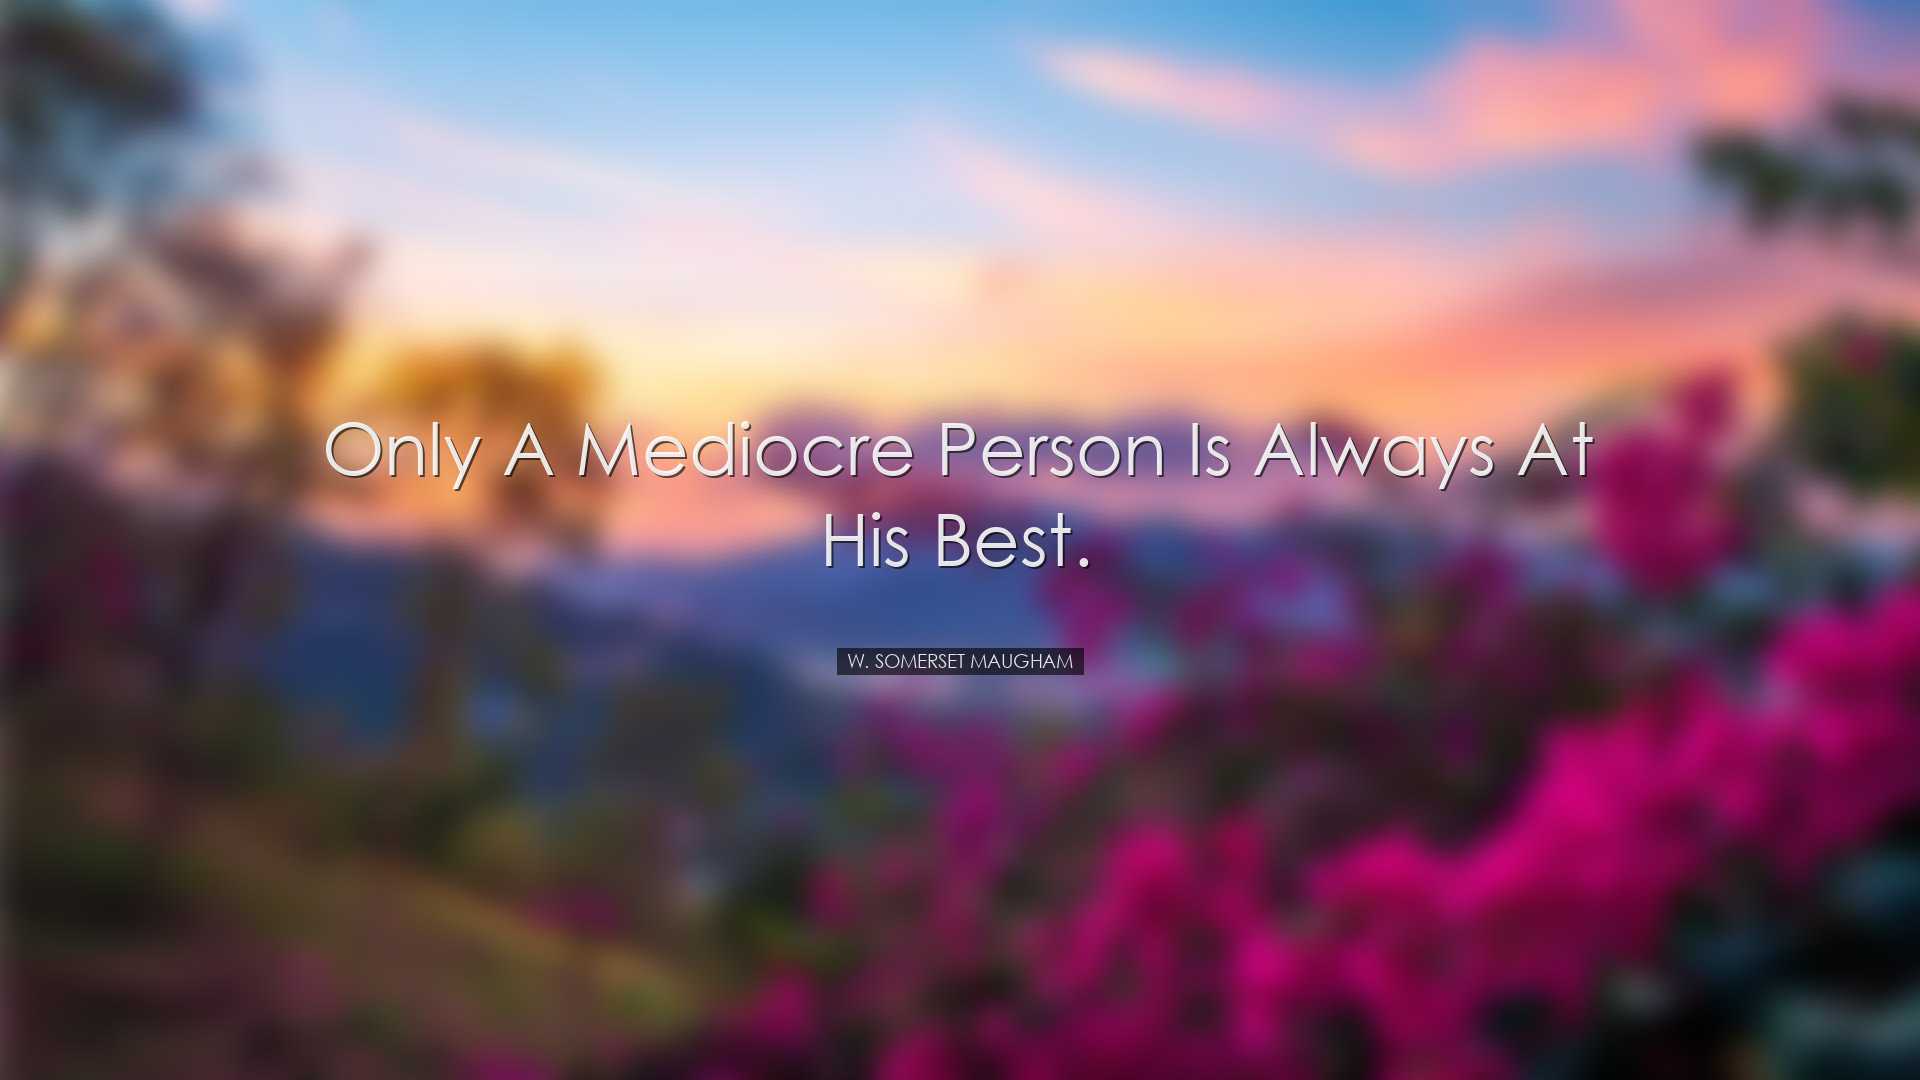 Only a mediocre person is always at his best. - W. Somerset Maugha